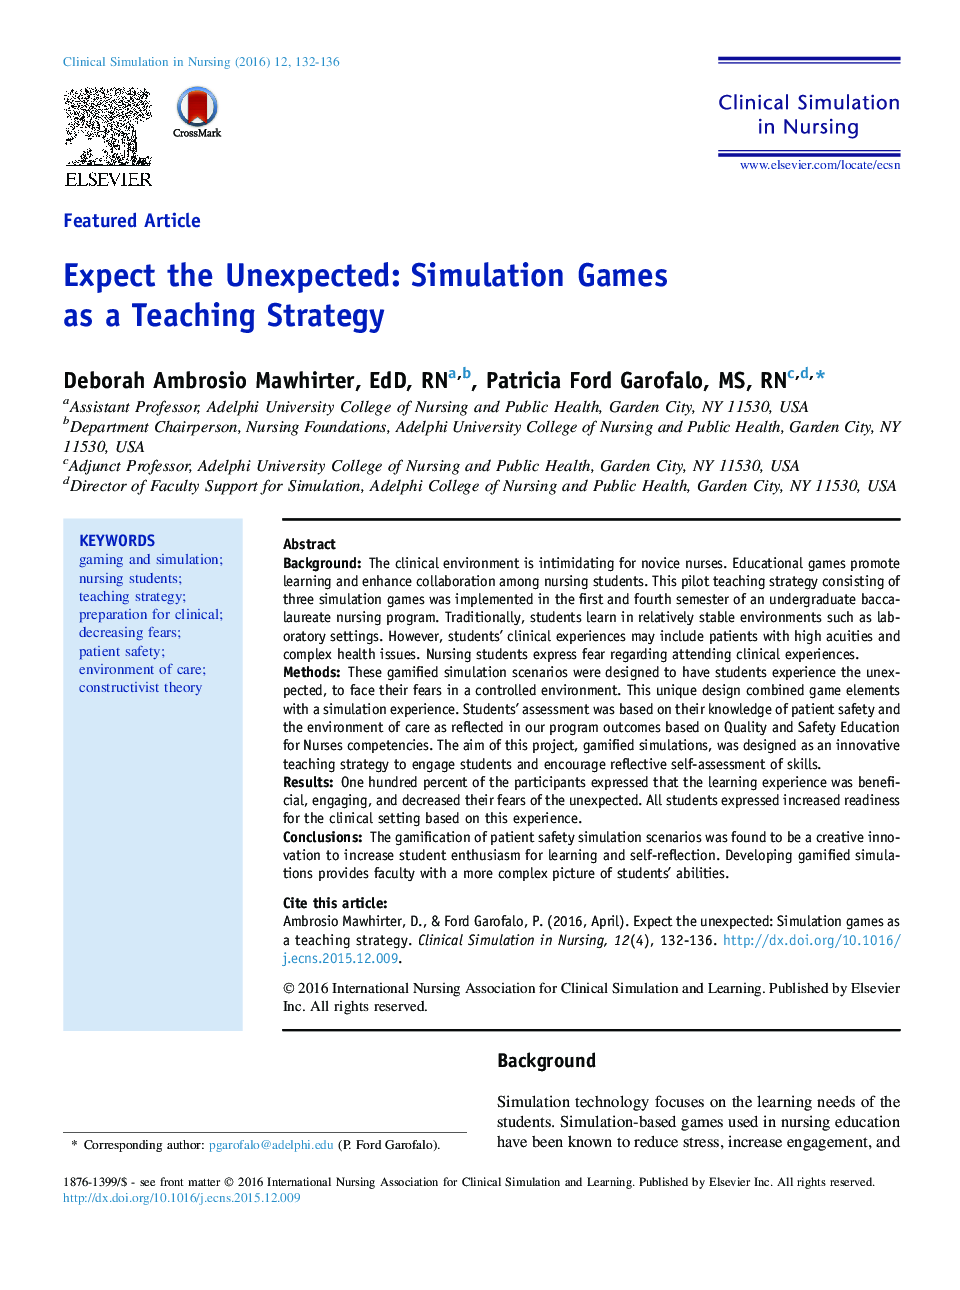 Expect the Unexpected: Simulation Games as a Teaching Strategy